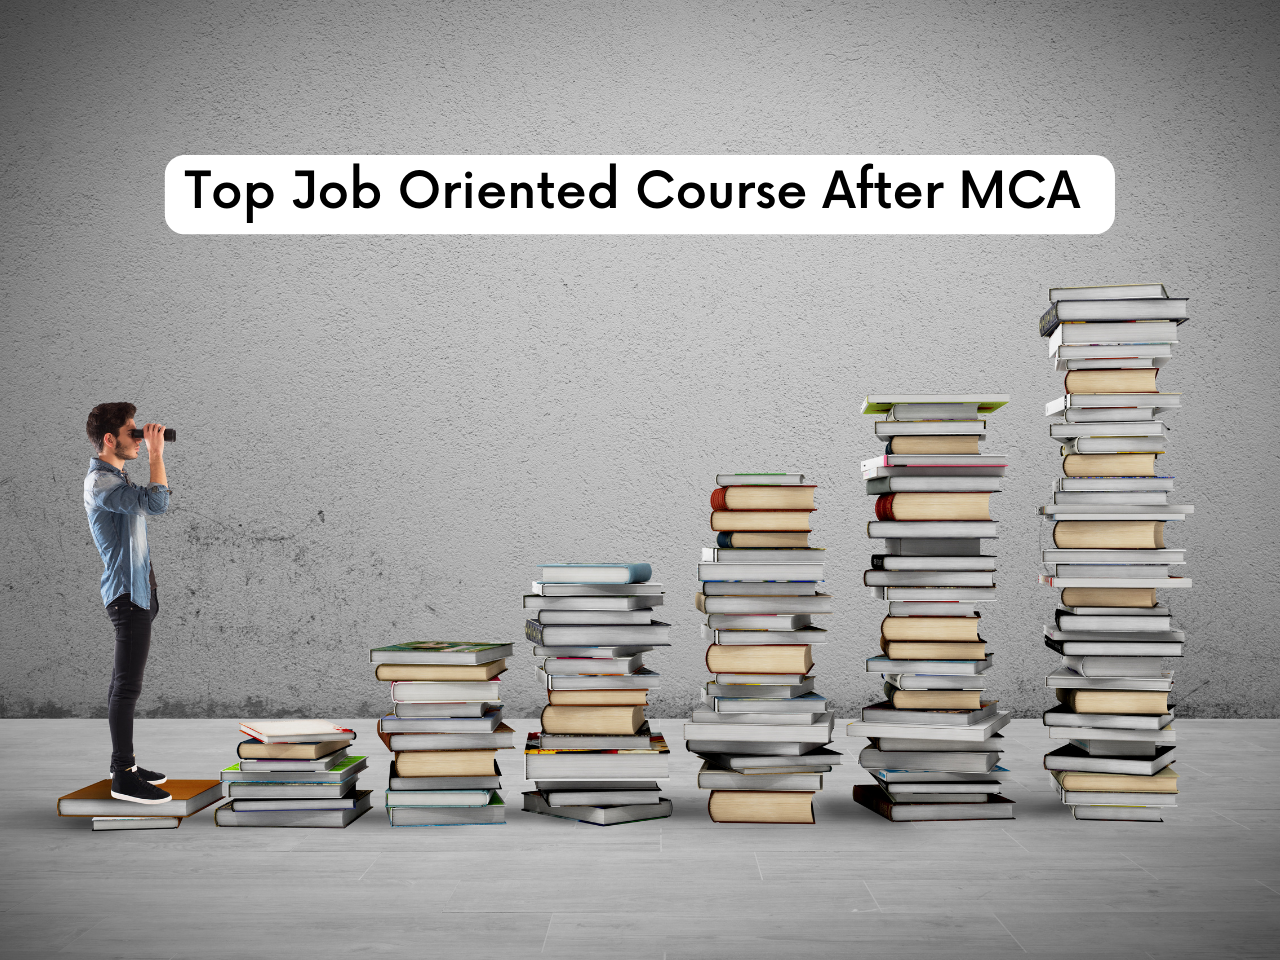 Top Job Oriented Course After MCA